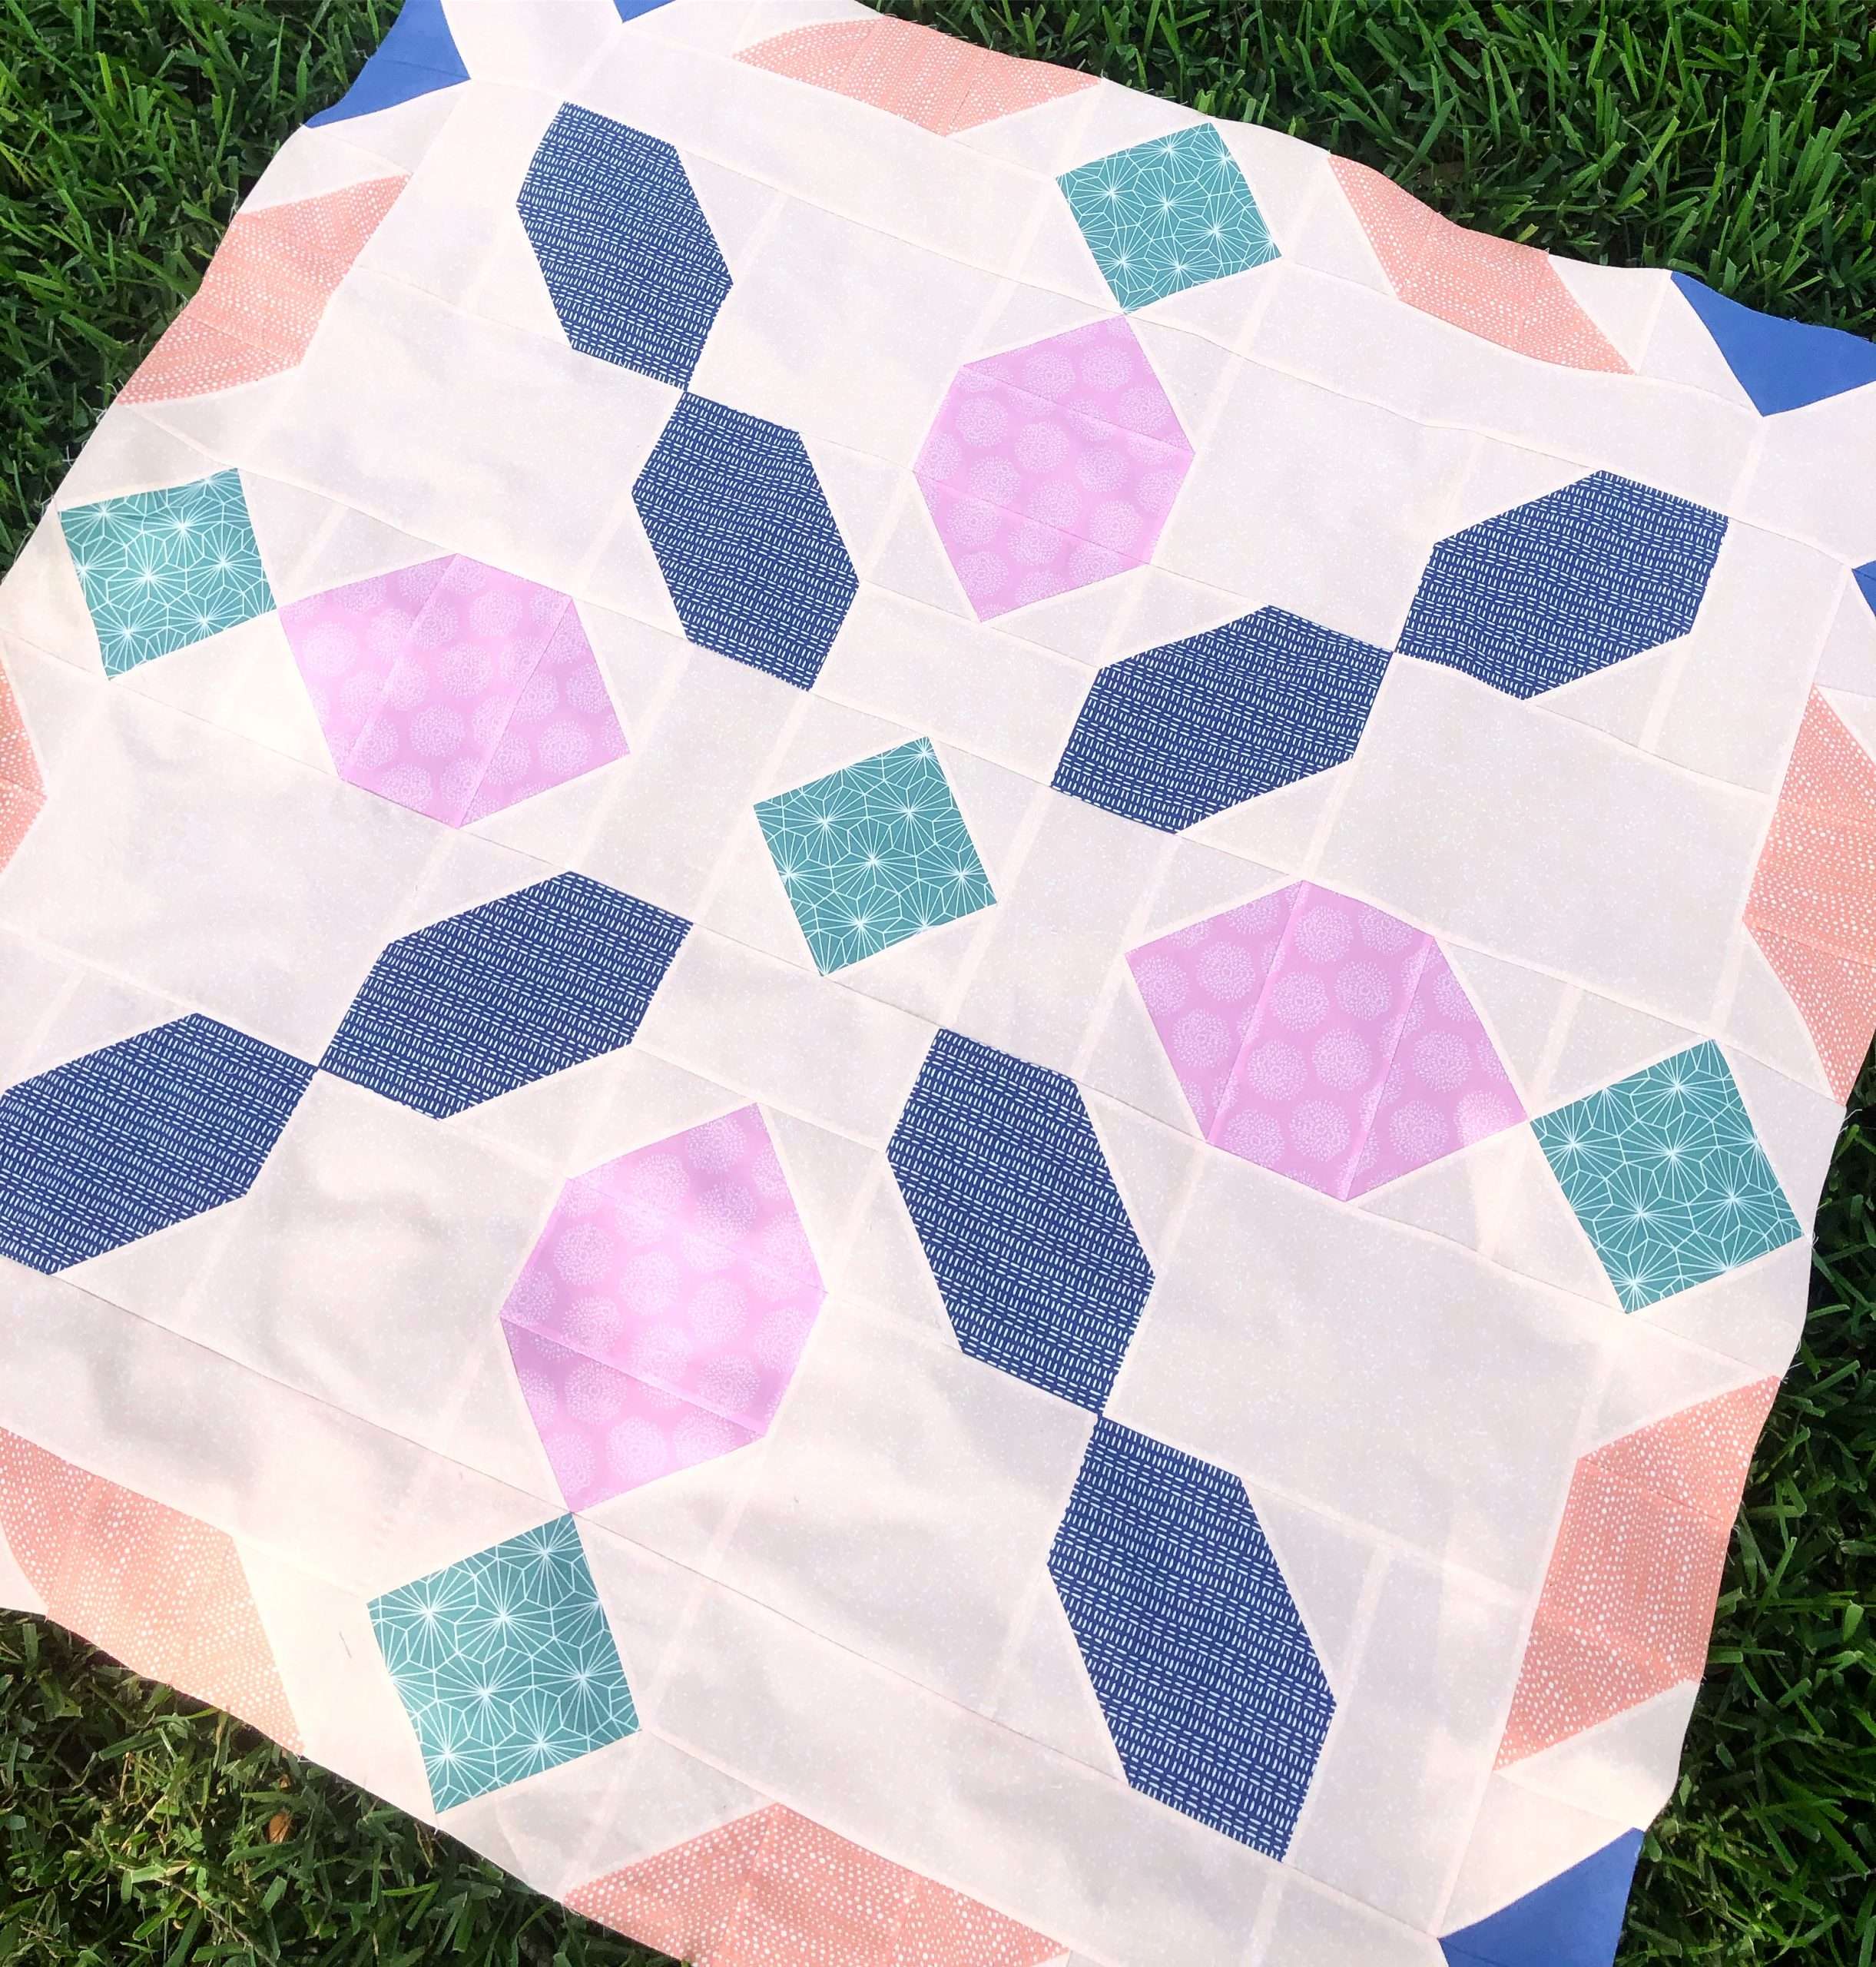 Connector Quilt: Fabric Variatons